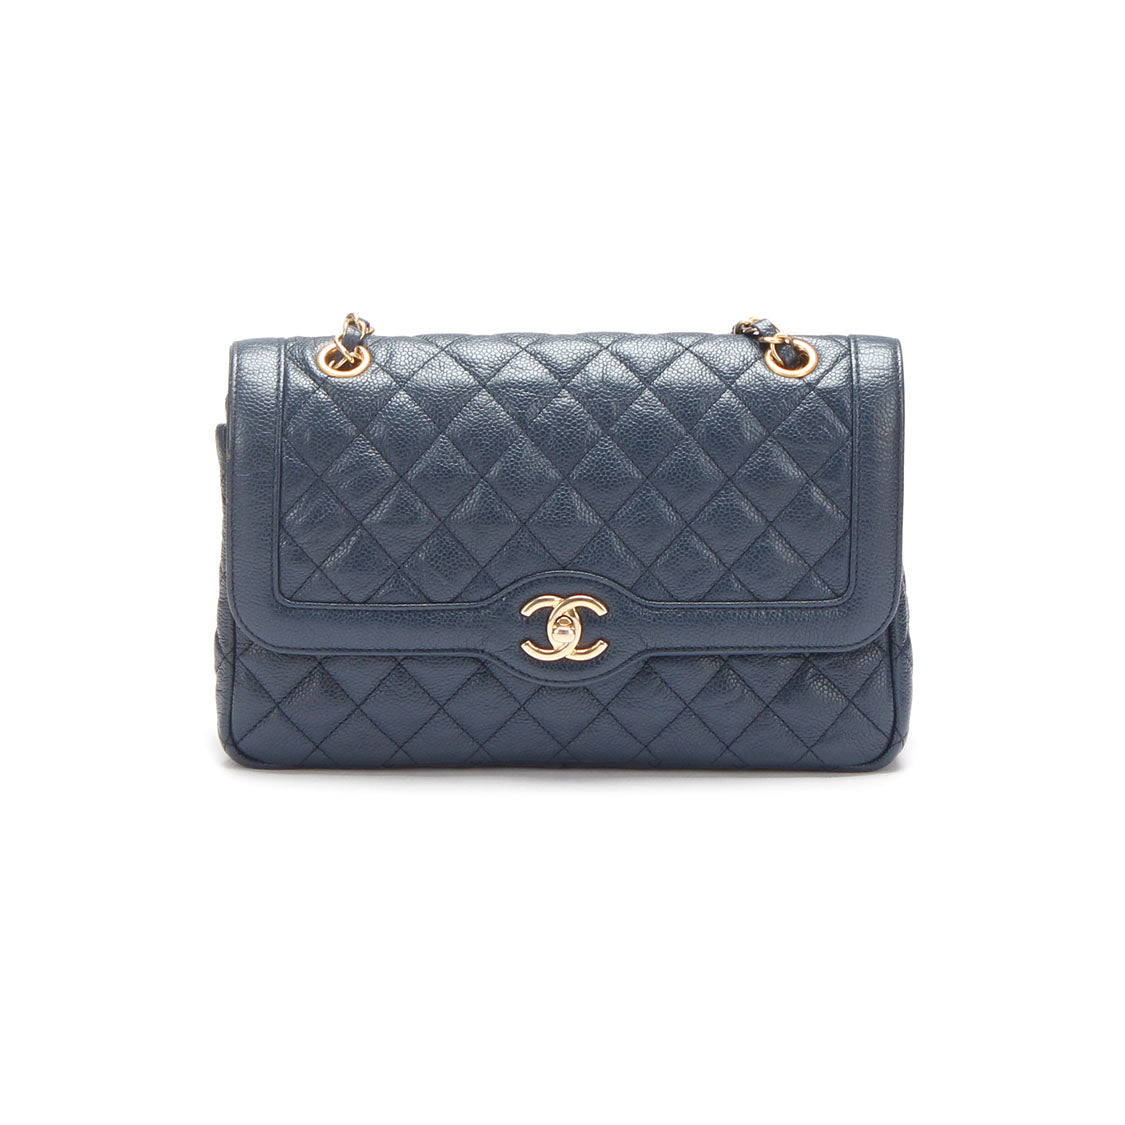 Chanel CC Quilted Caviar Flap Bag Leather Shoulder Bag in Good condition